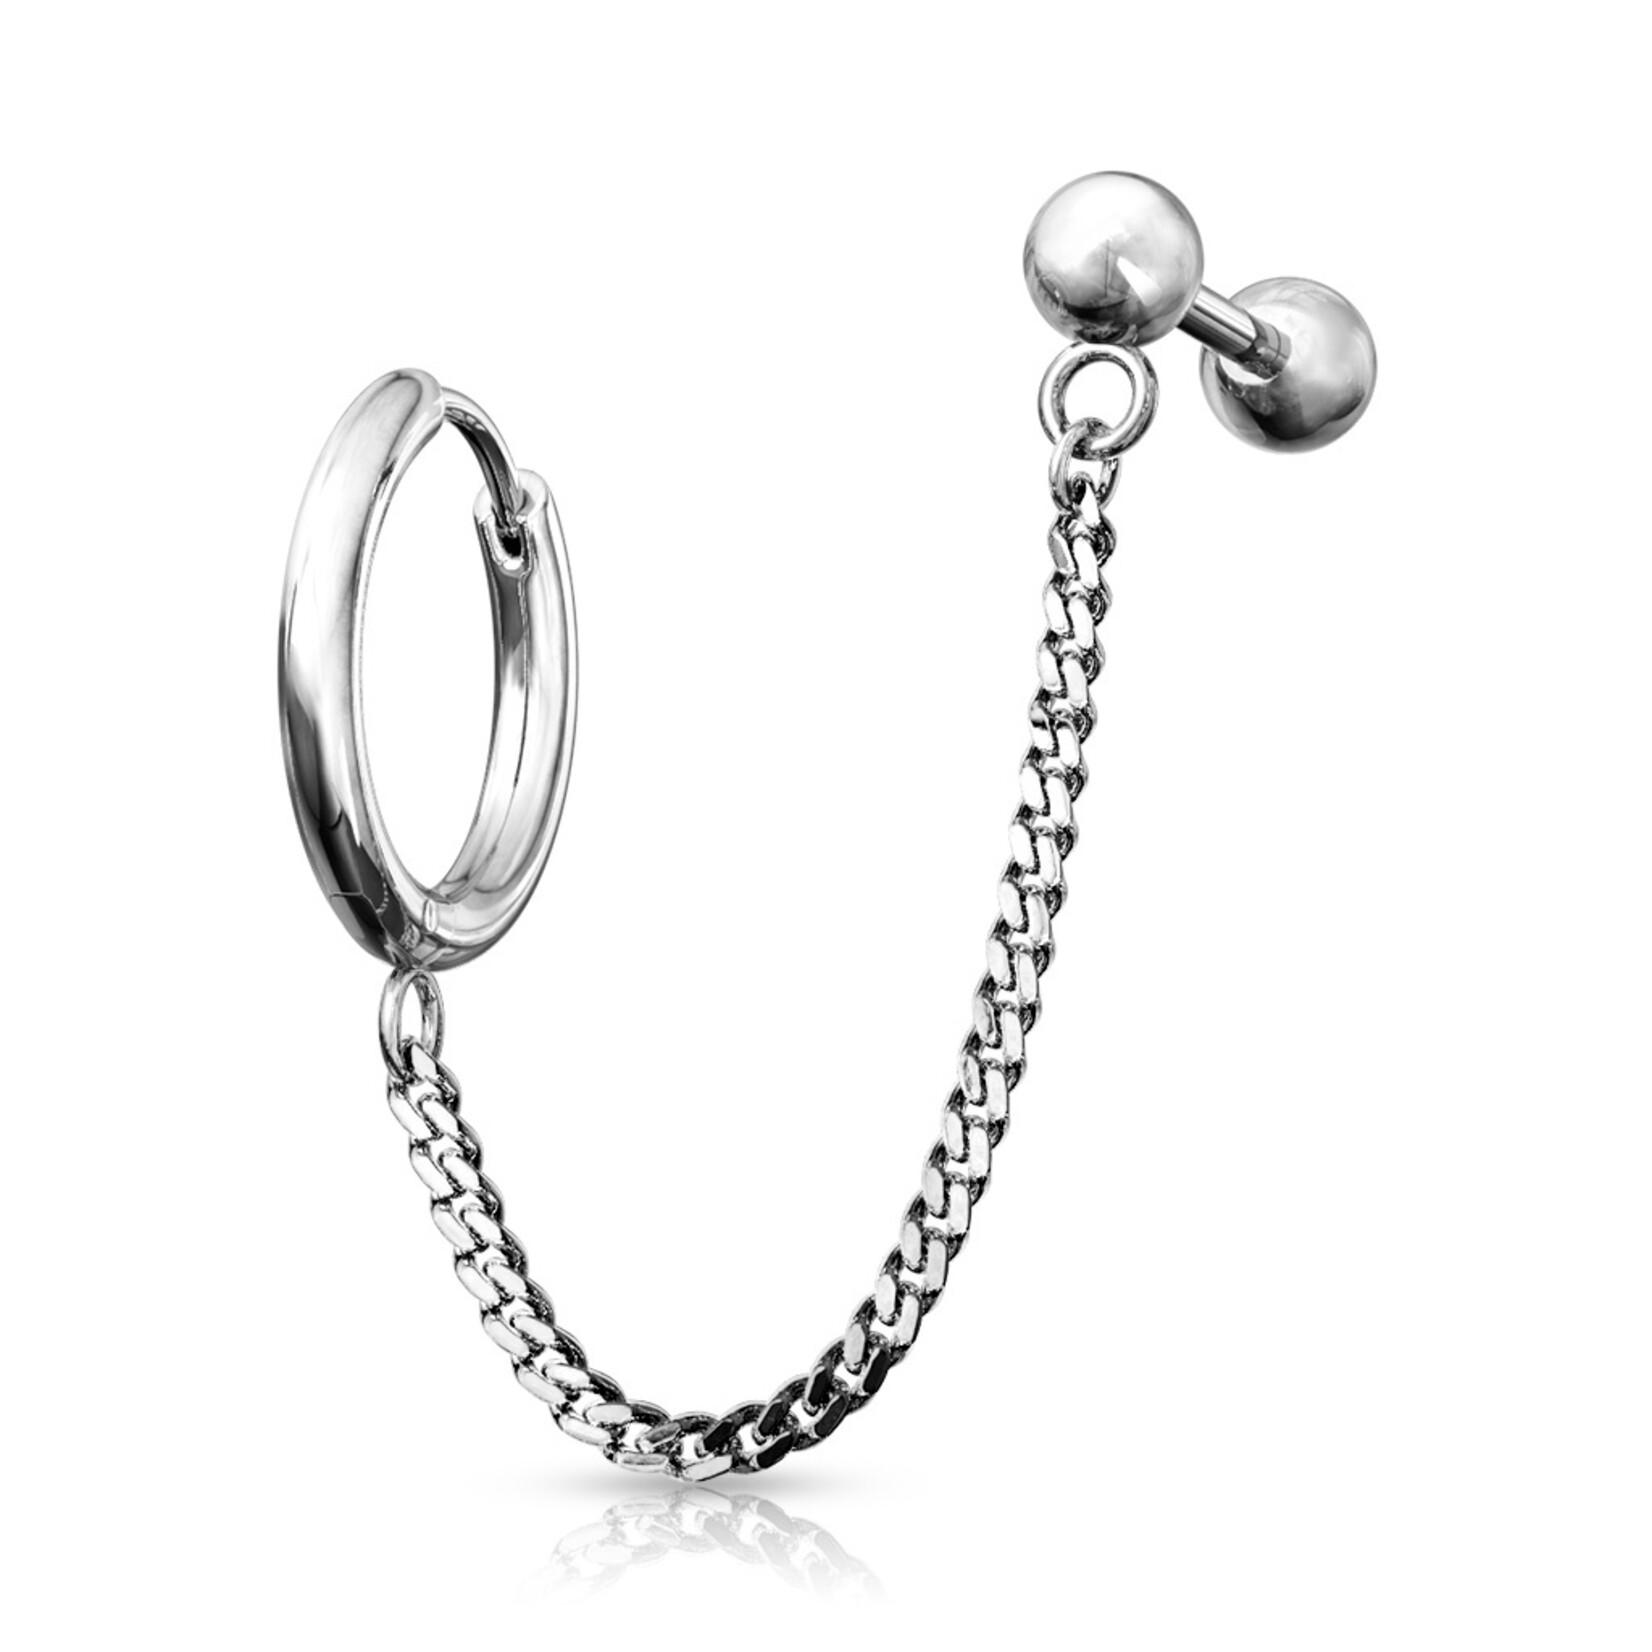 Body Jewerly Round Clicker Hoop Earring and Chain Linked Cartilage Barbell